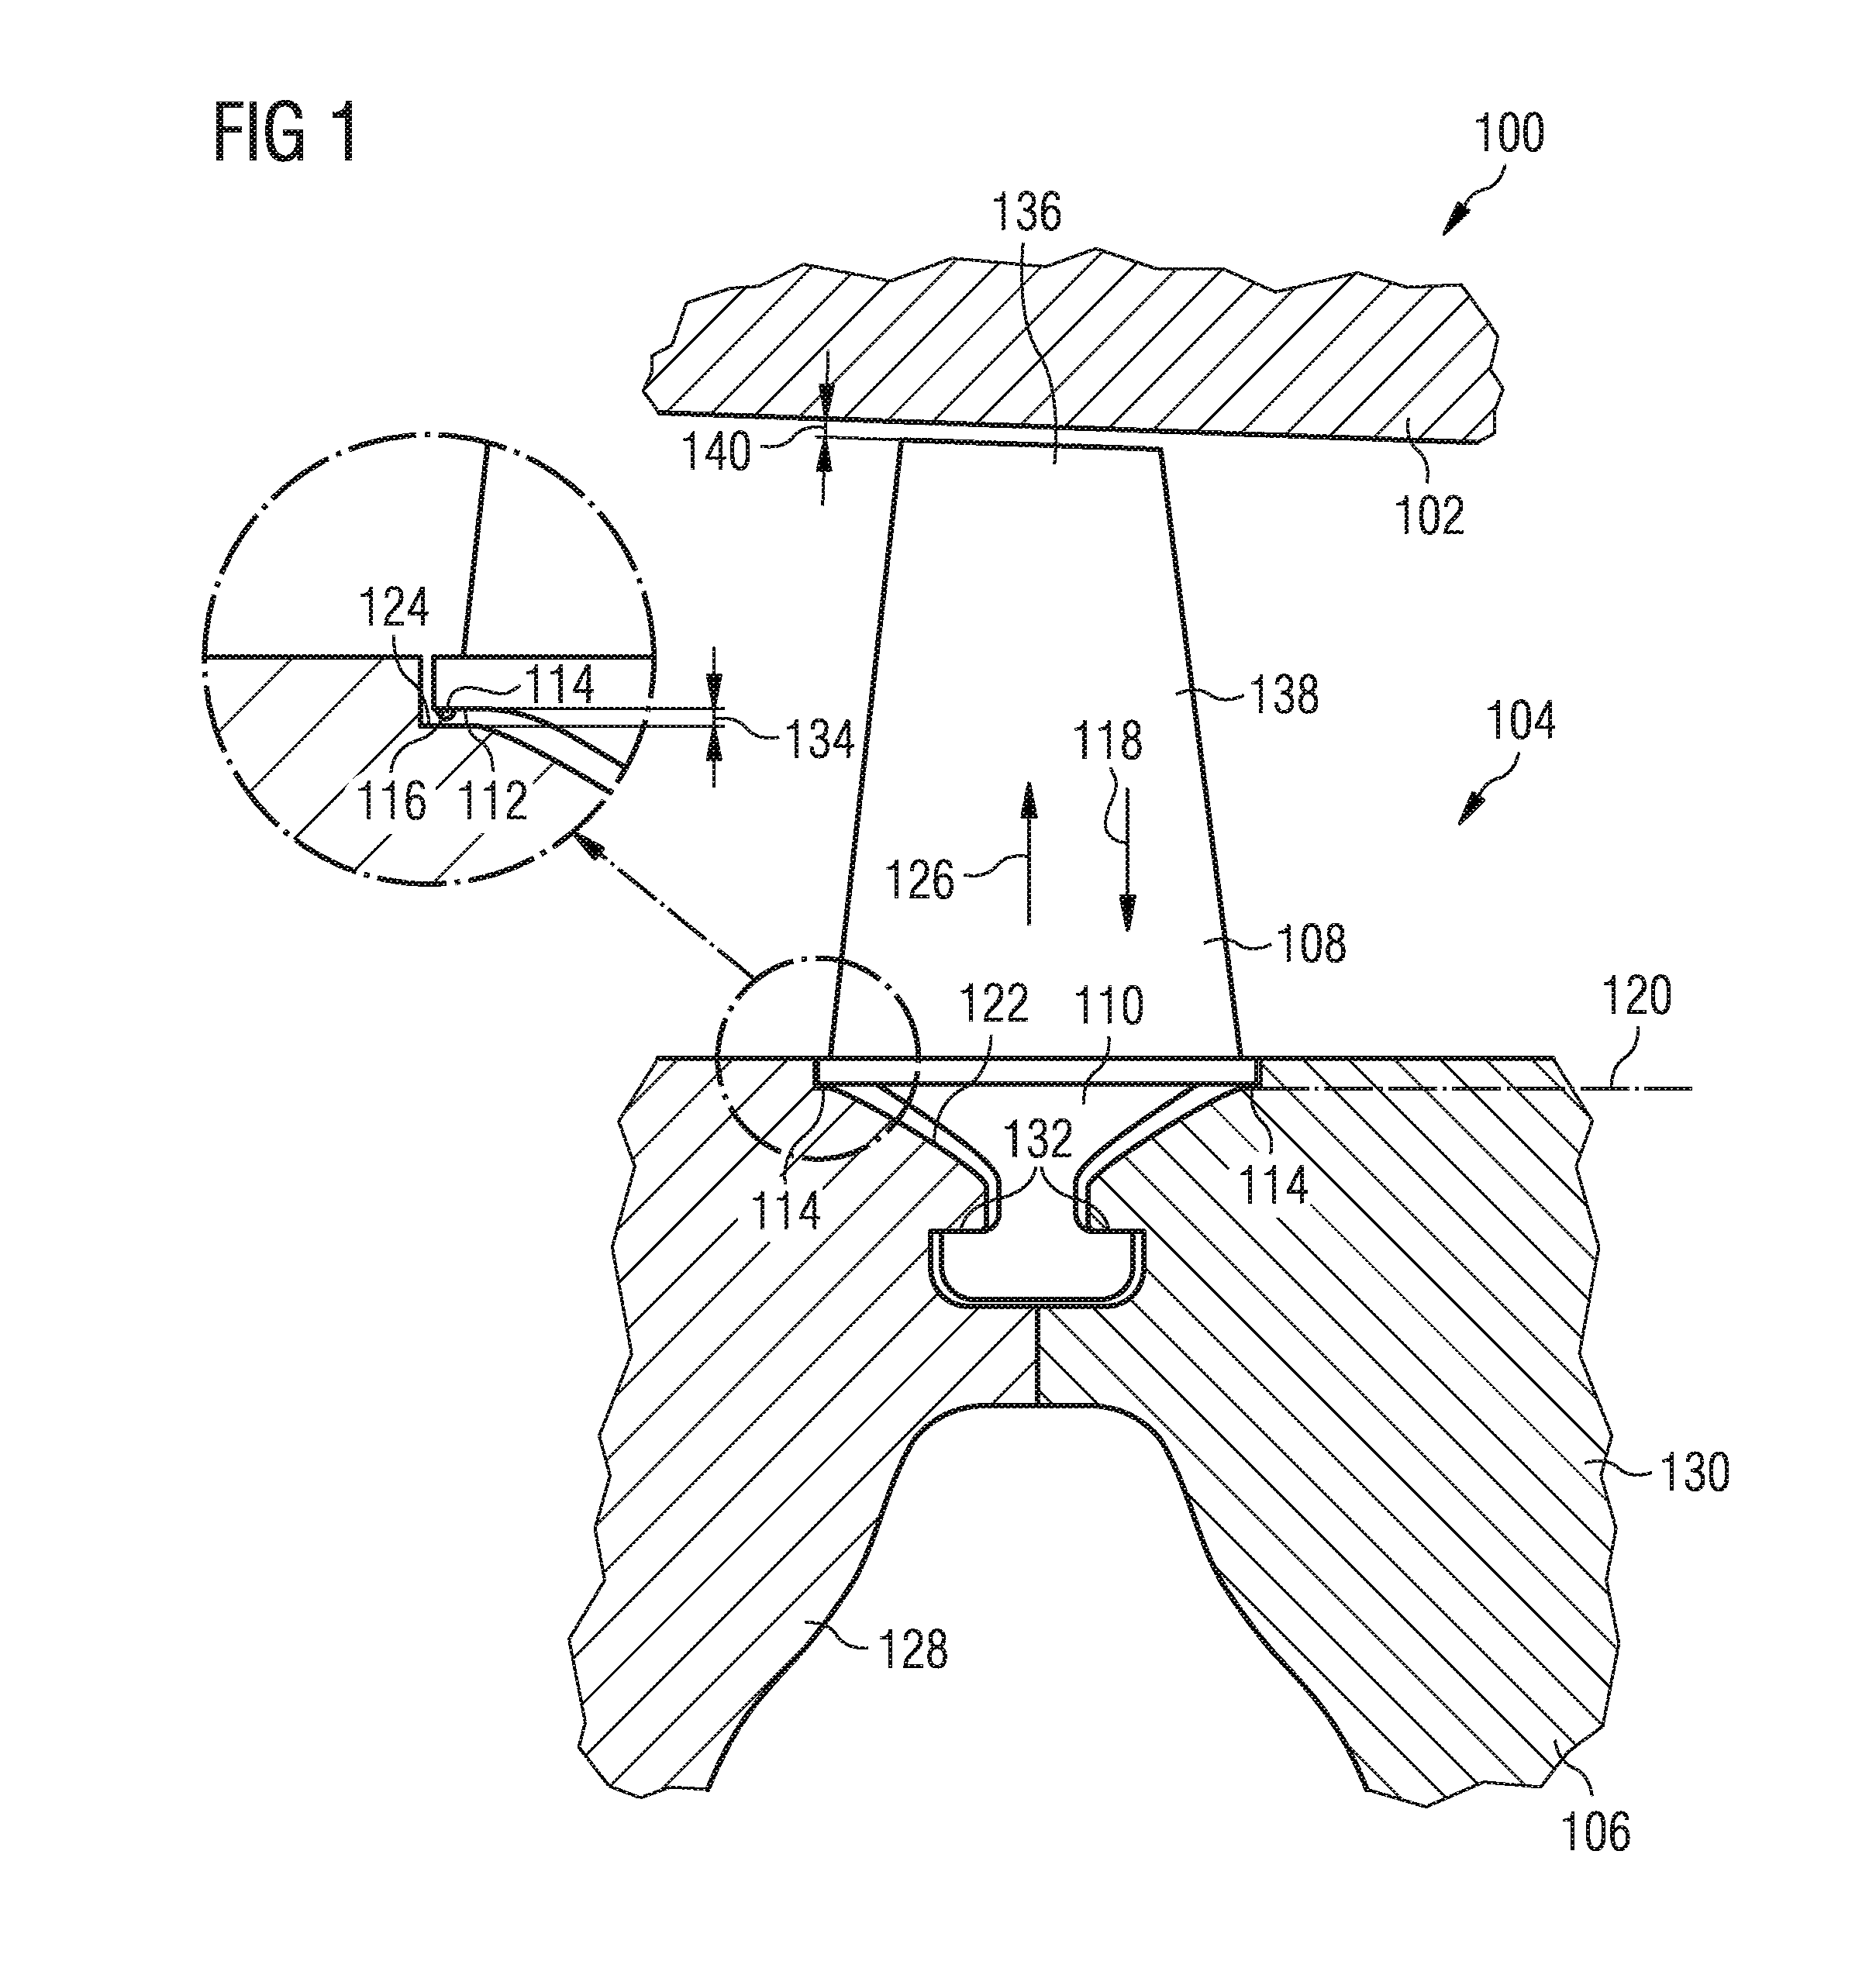 Turbomachine rotor with blade roots with adjusting protrusions